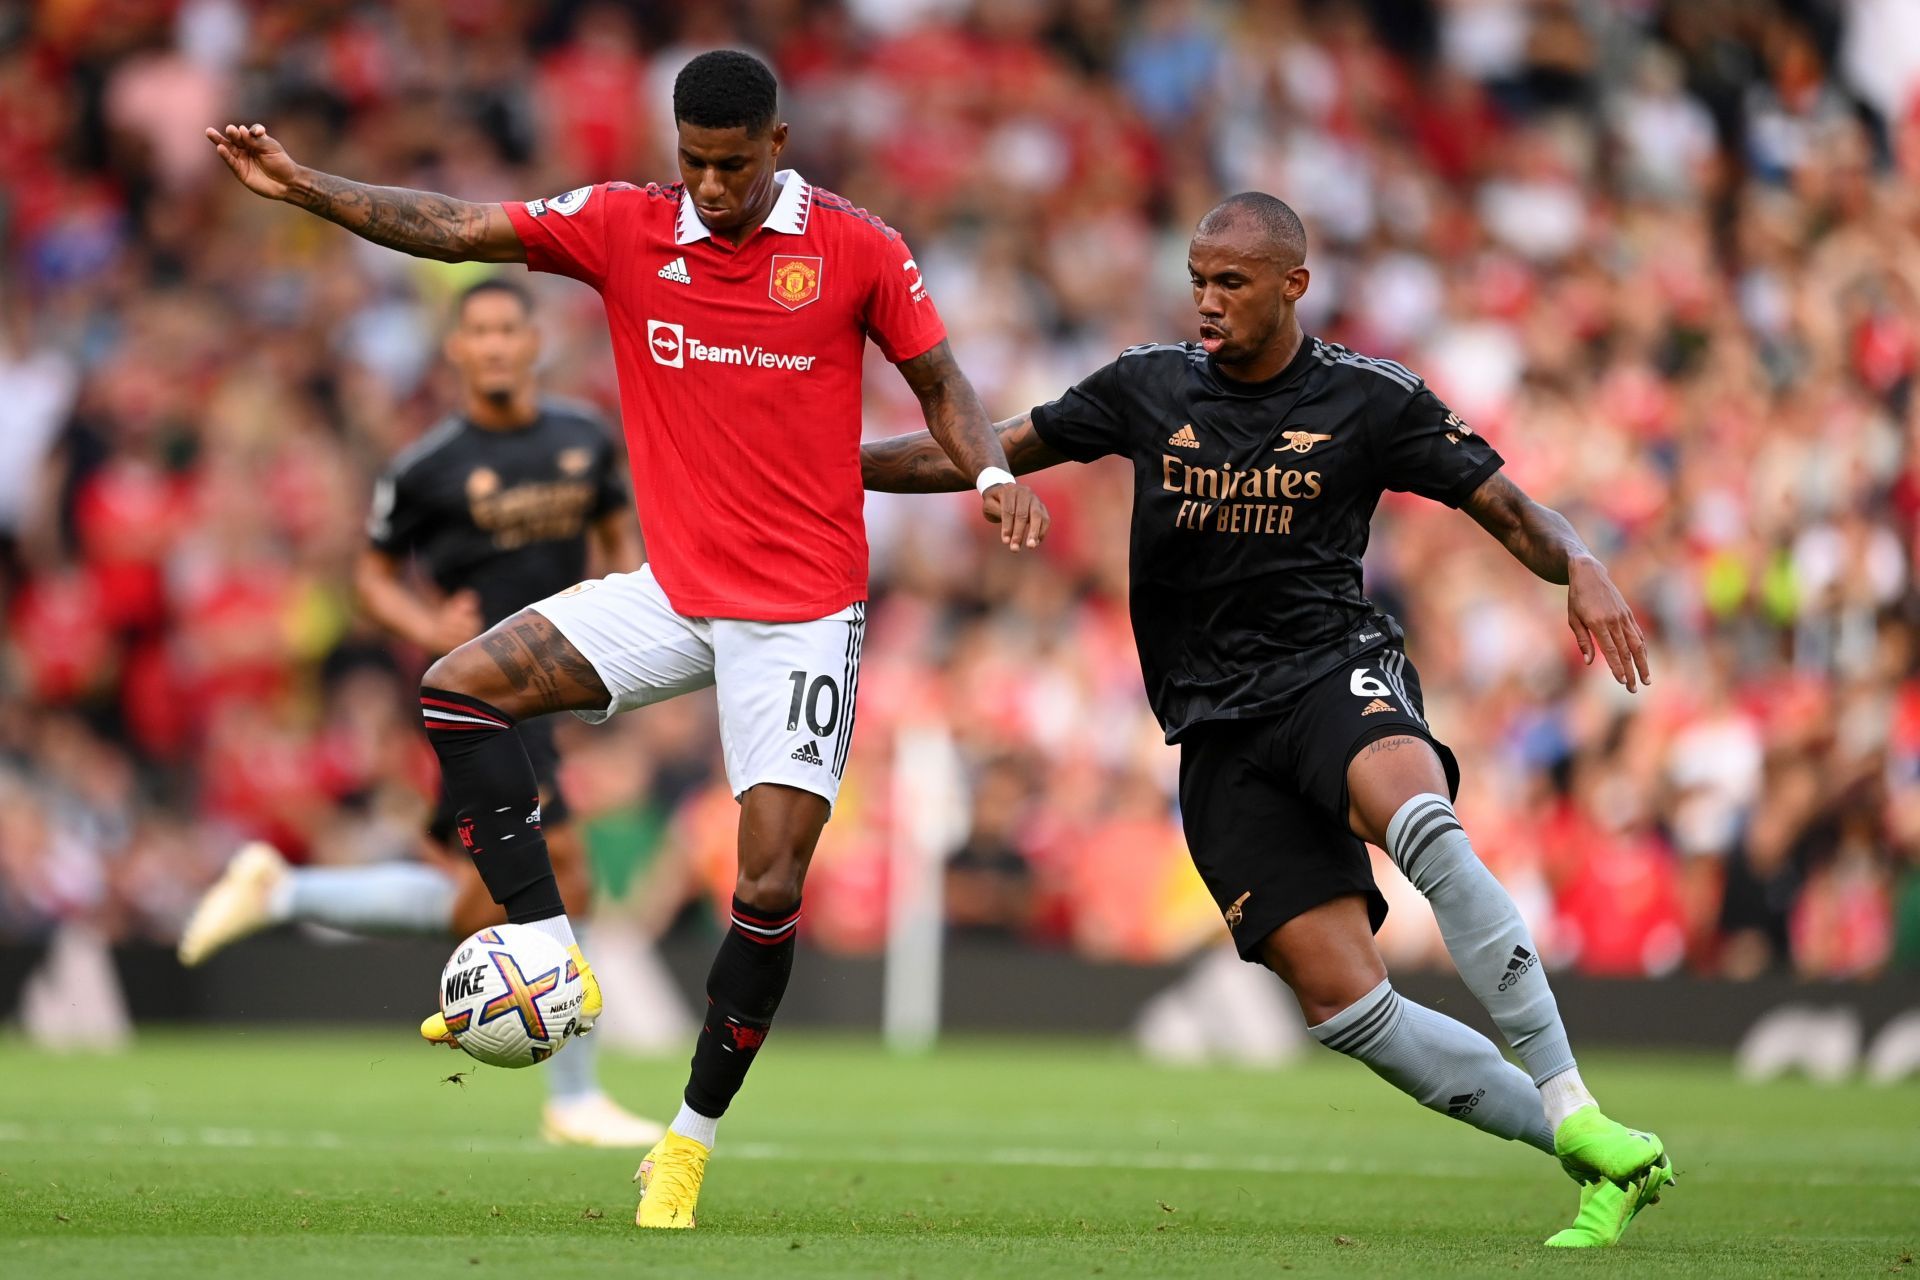 Marcus Rashford (left) has been in good form for Manchester United this season.